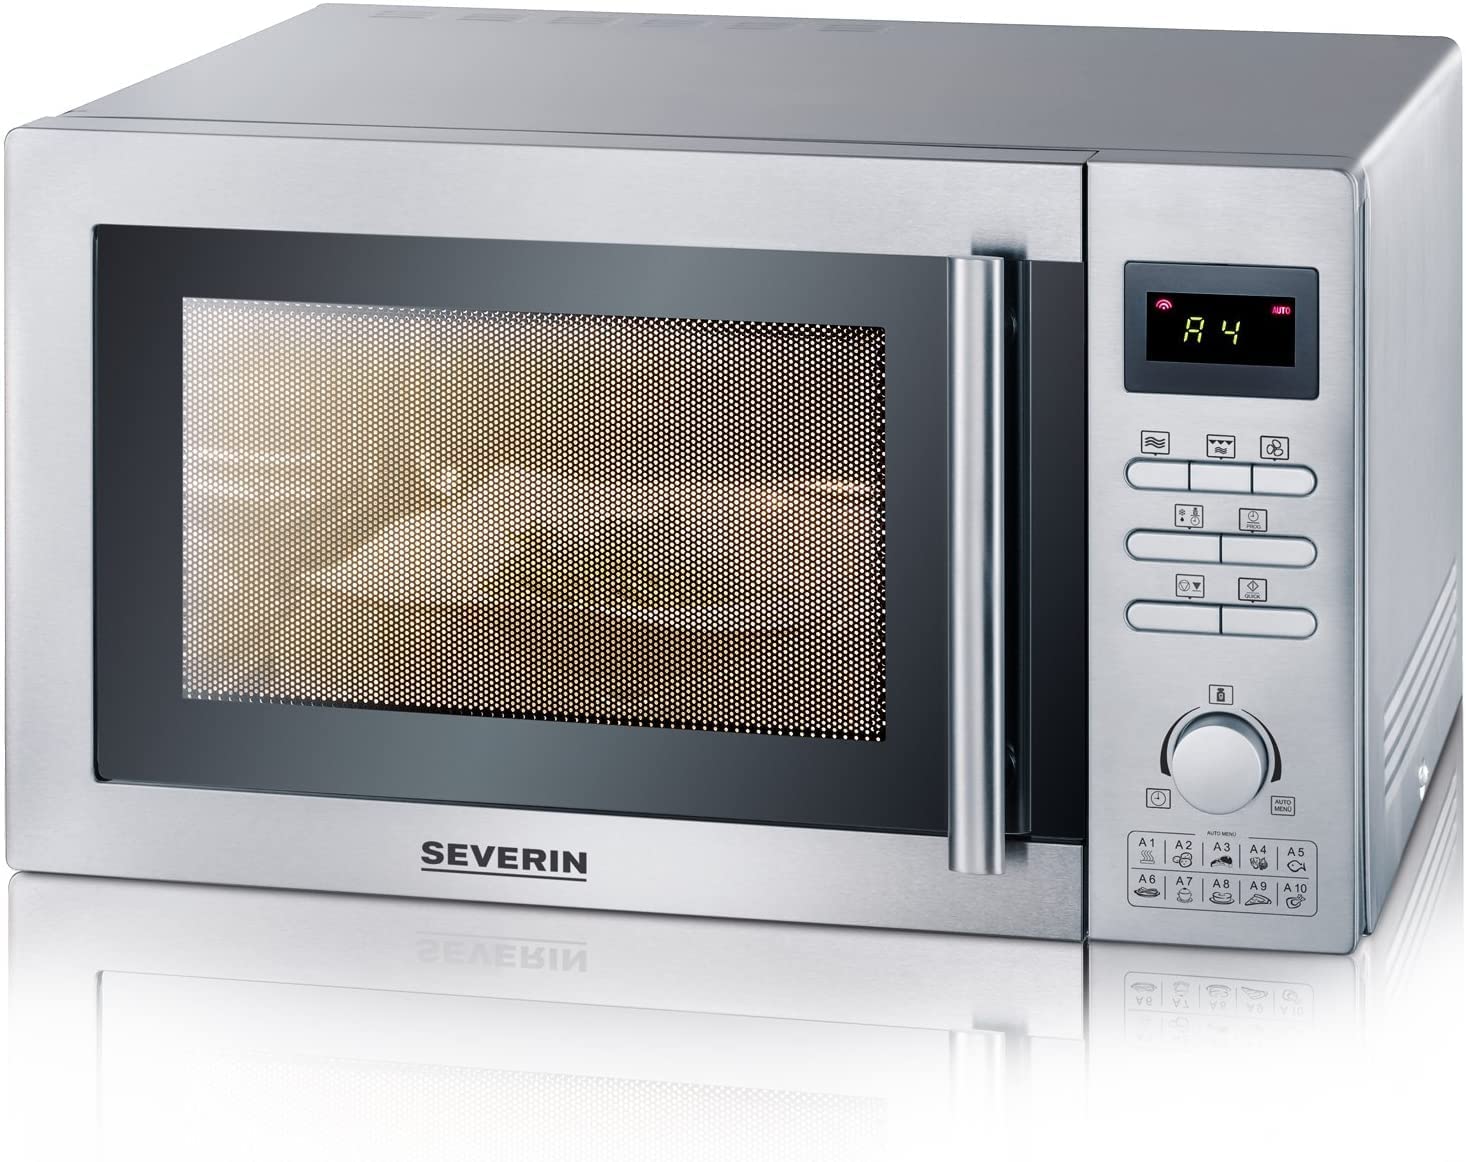 SEVERIN MW 7868 NA//900kWh/year/900W/25L/hot air function/grill/brushed sta